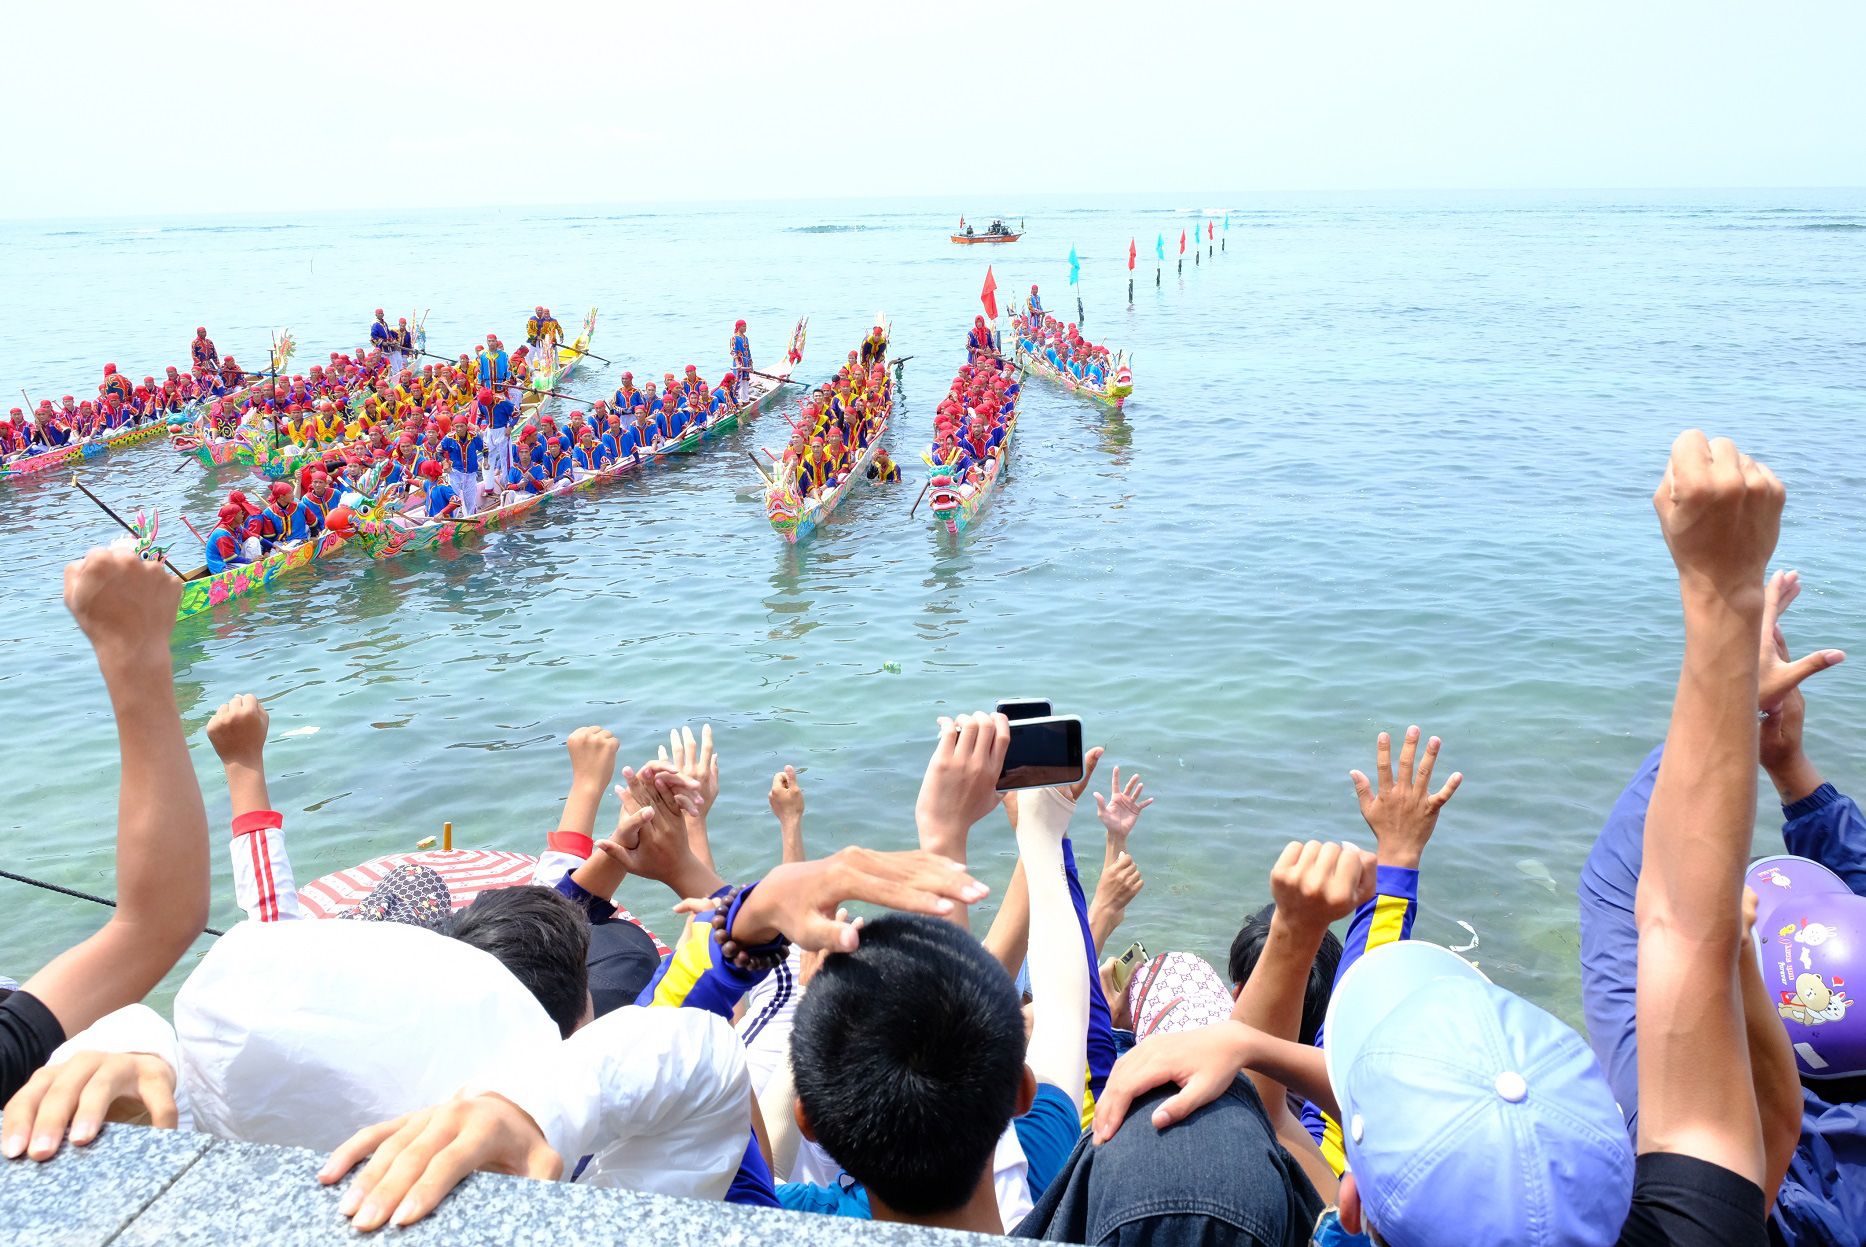 Spectators cheer on teams competing at the Tu Linh boat racing festival in Ly Son District, Quang Ngai Province, Vietnam, April 27, 2021. Photo: Tran Mai / Tuoi Tre